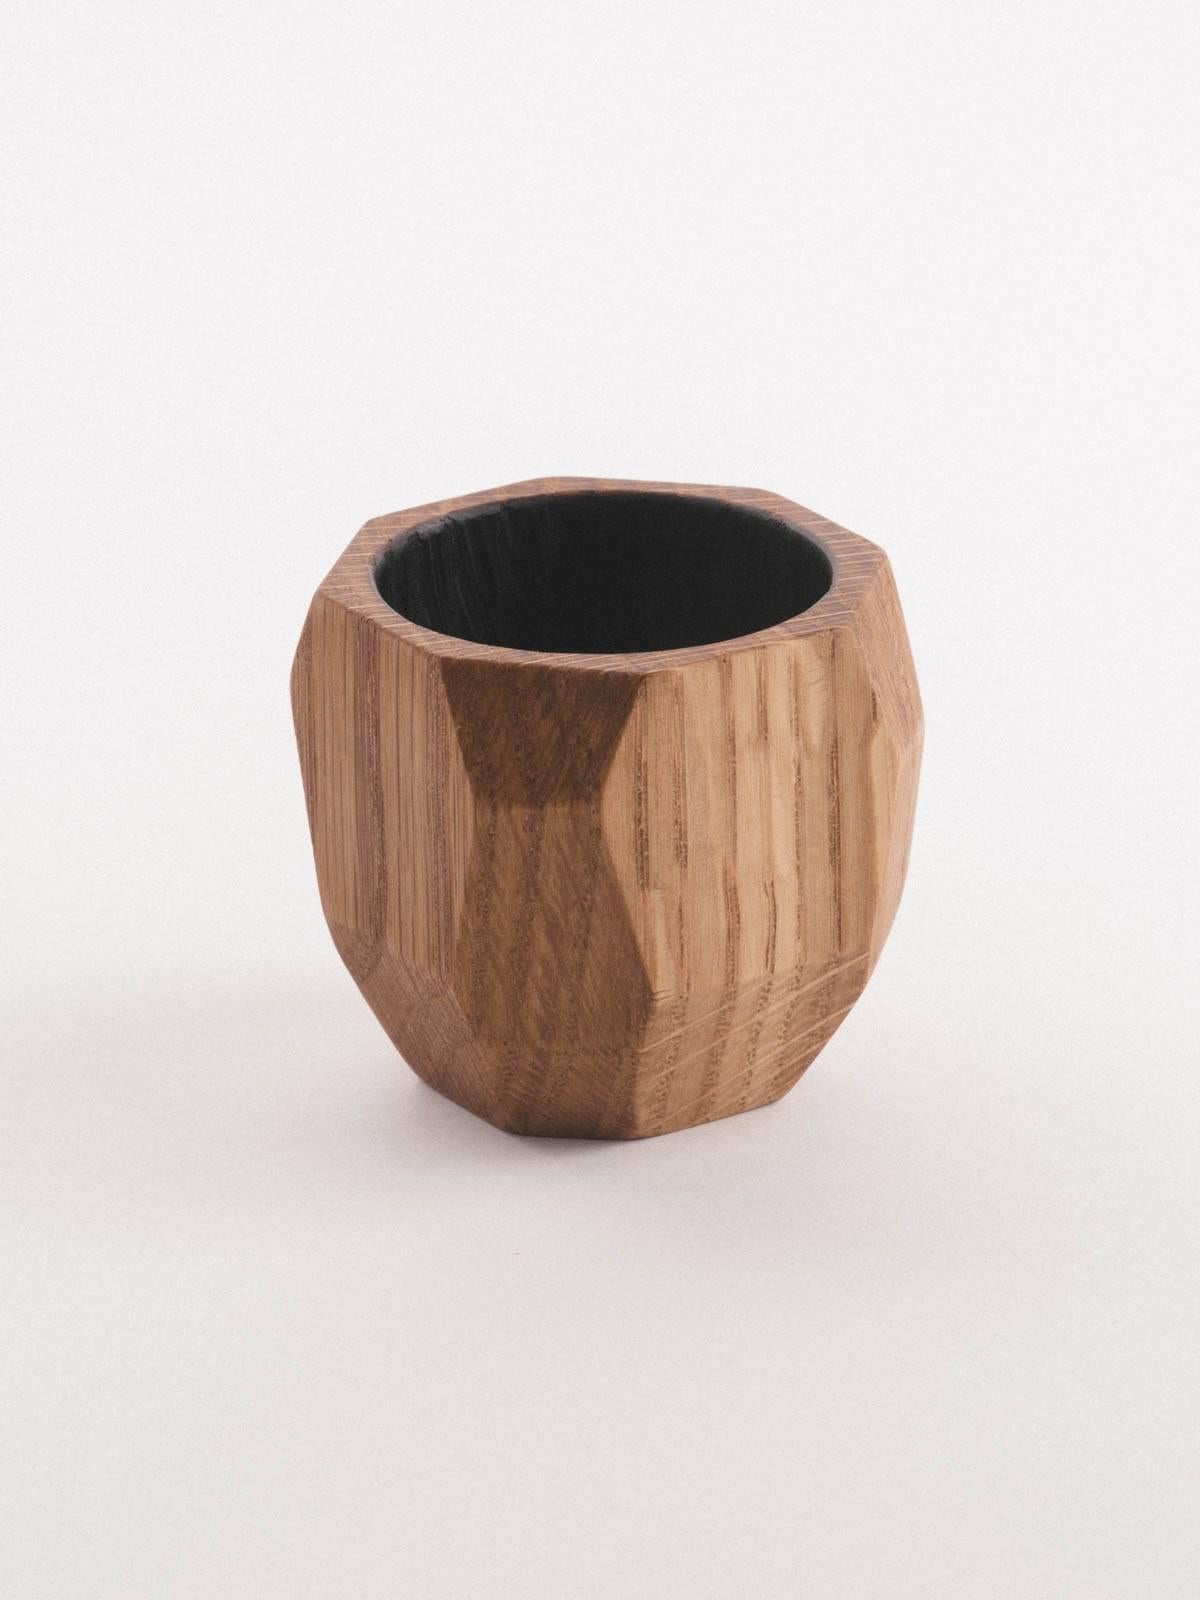 Both playful and graceful, each shape is milled, cut, and turned by hand. Each cup features a charred and polished interior. This charring harkens towards both Japanese 'shou sugi ban' techniques as well as the time-honored tradition of distilleries